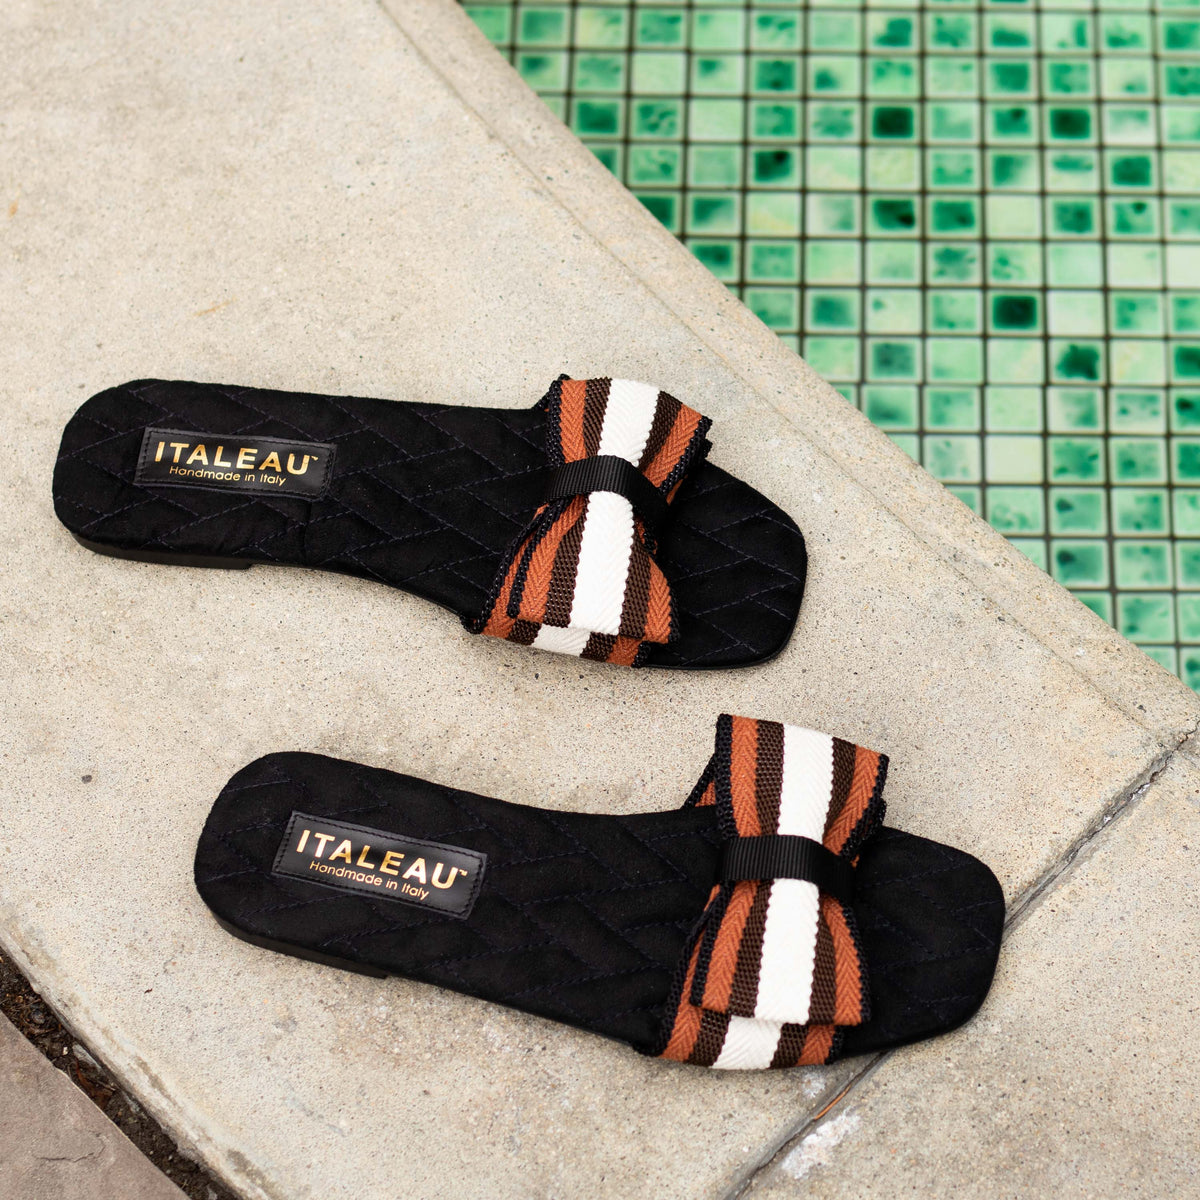 Italeau Doll sandals are comfortable and handmade in Italy